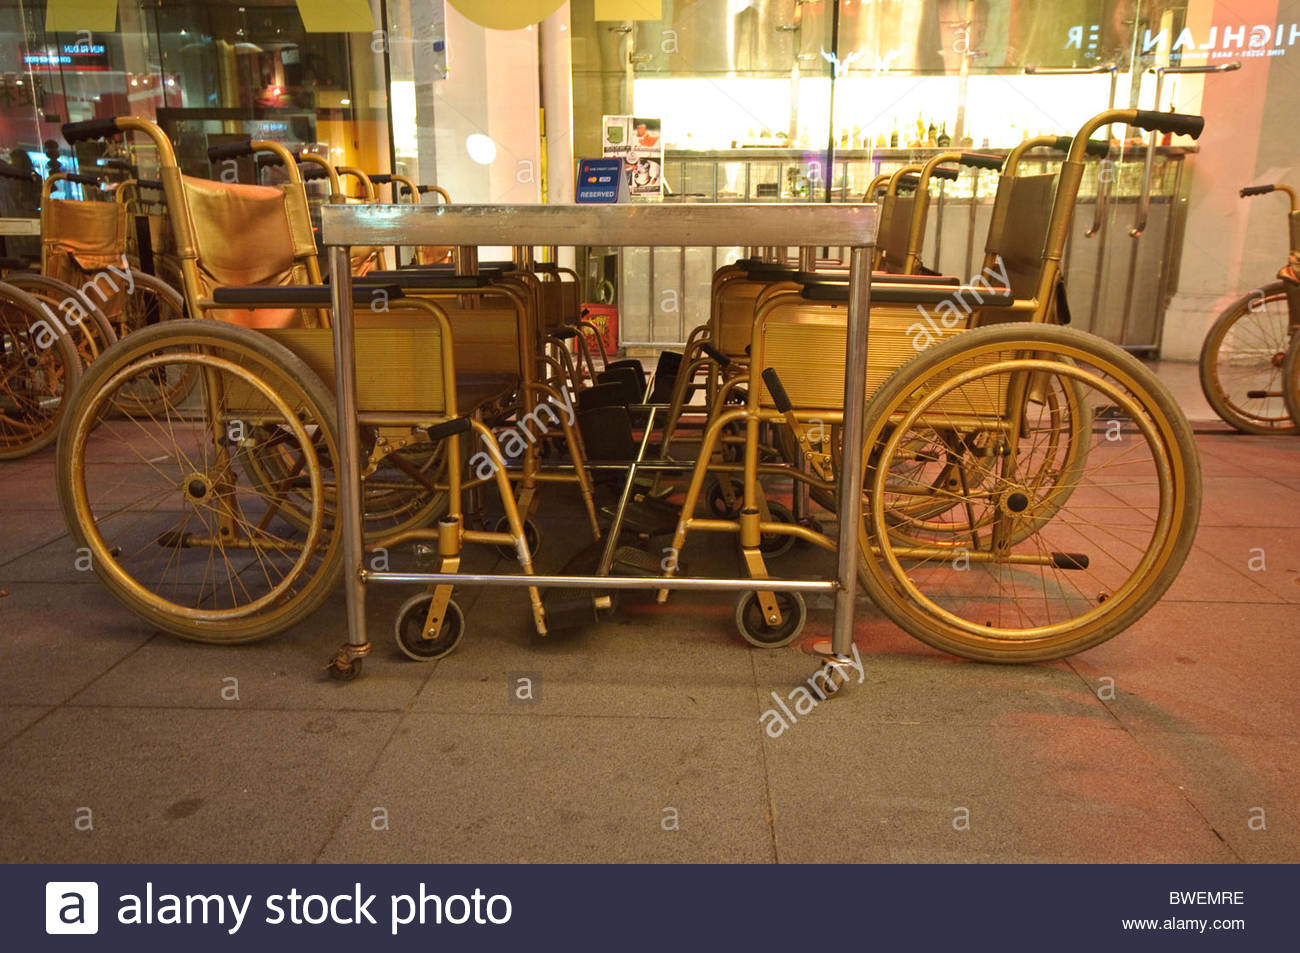 Wheelchairs And Hospital Table Used As Furniture In A Bar Hip